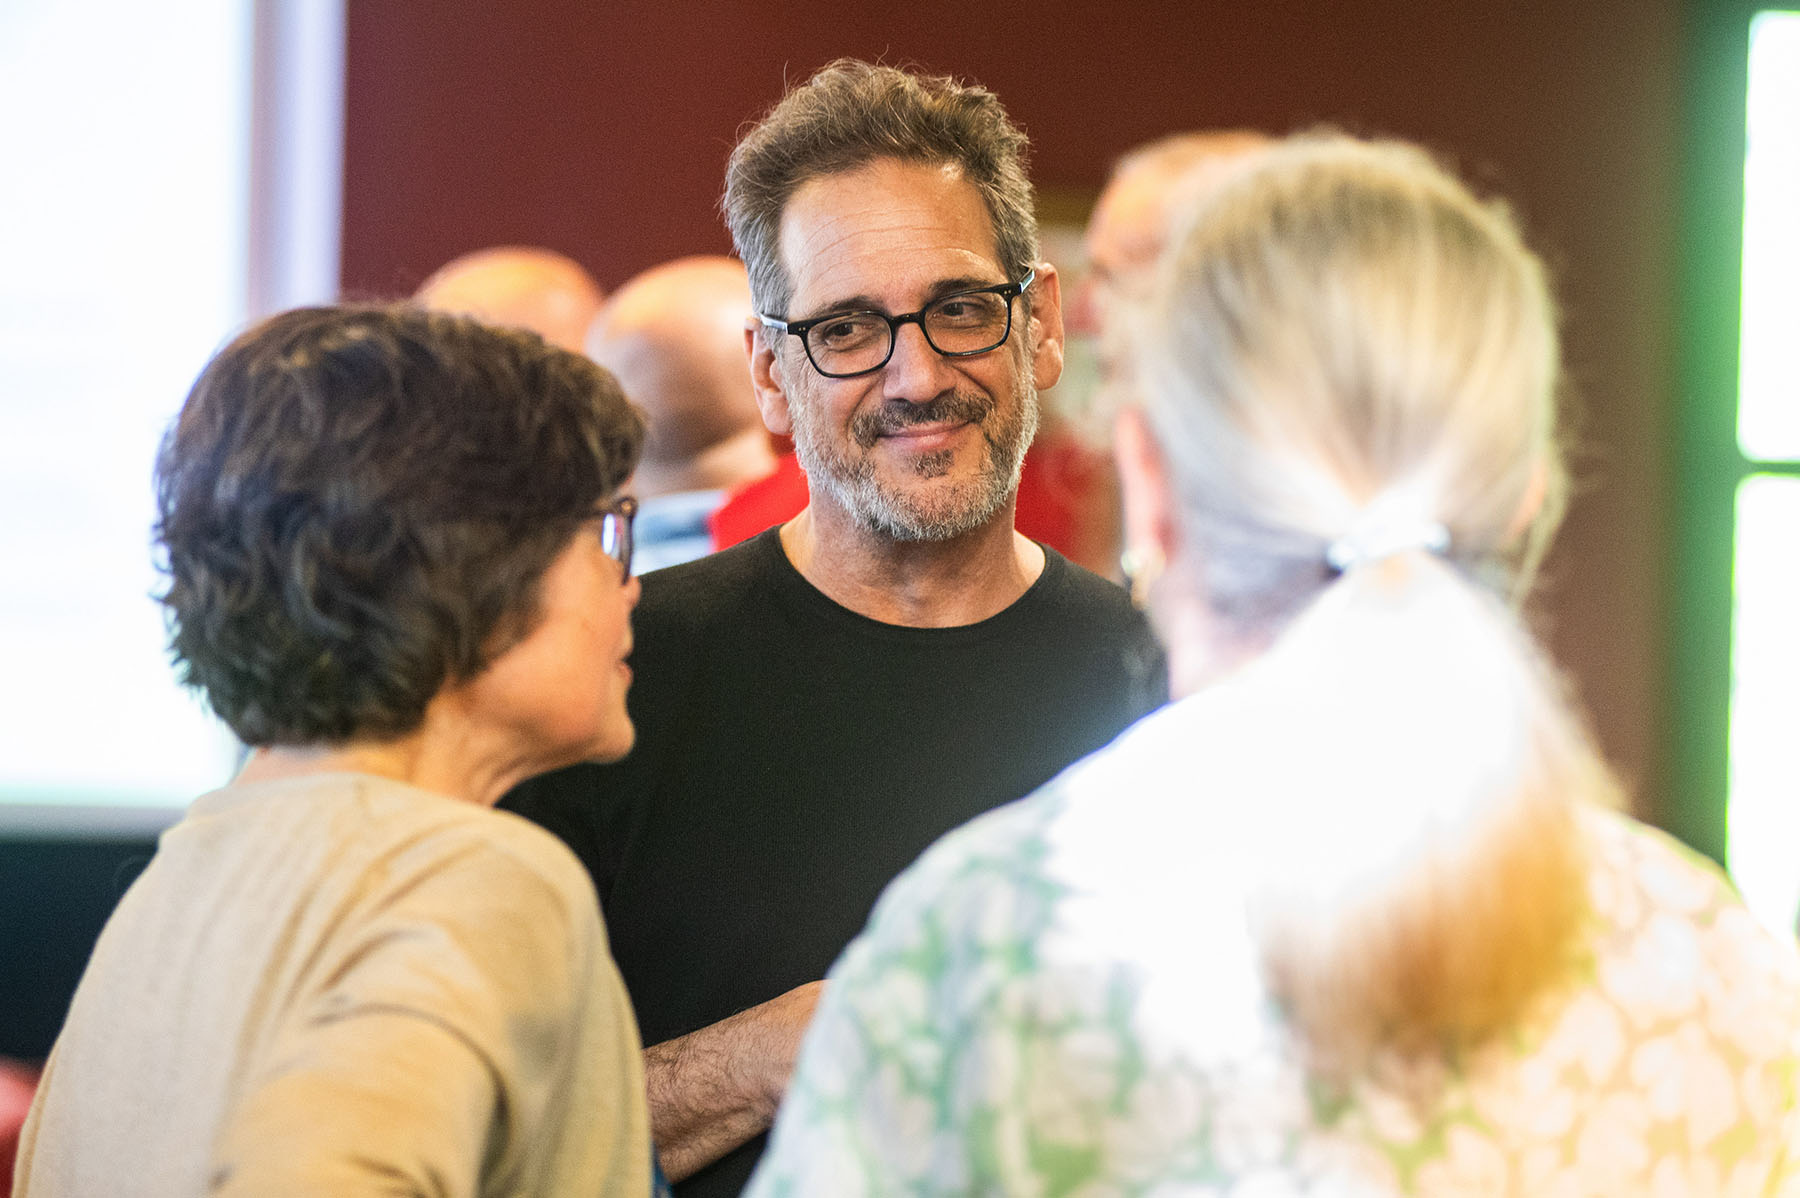 Professor of Anthropology Thomas Porcello engaging in conversation with attendees at an event.